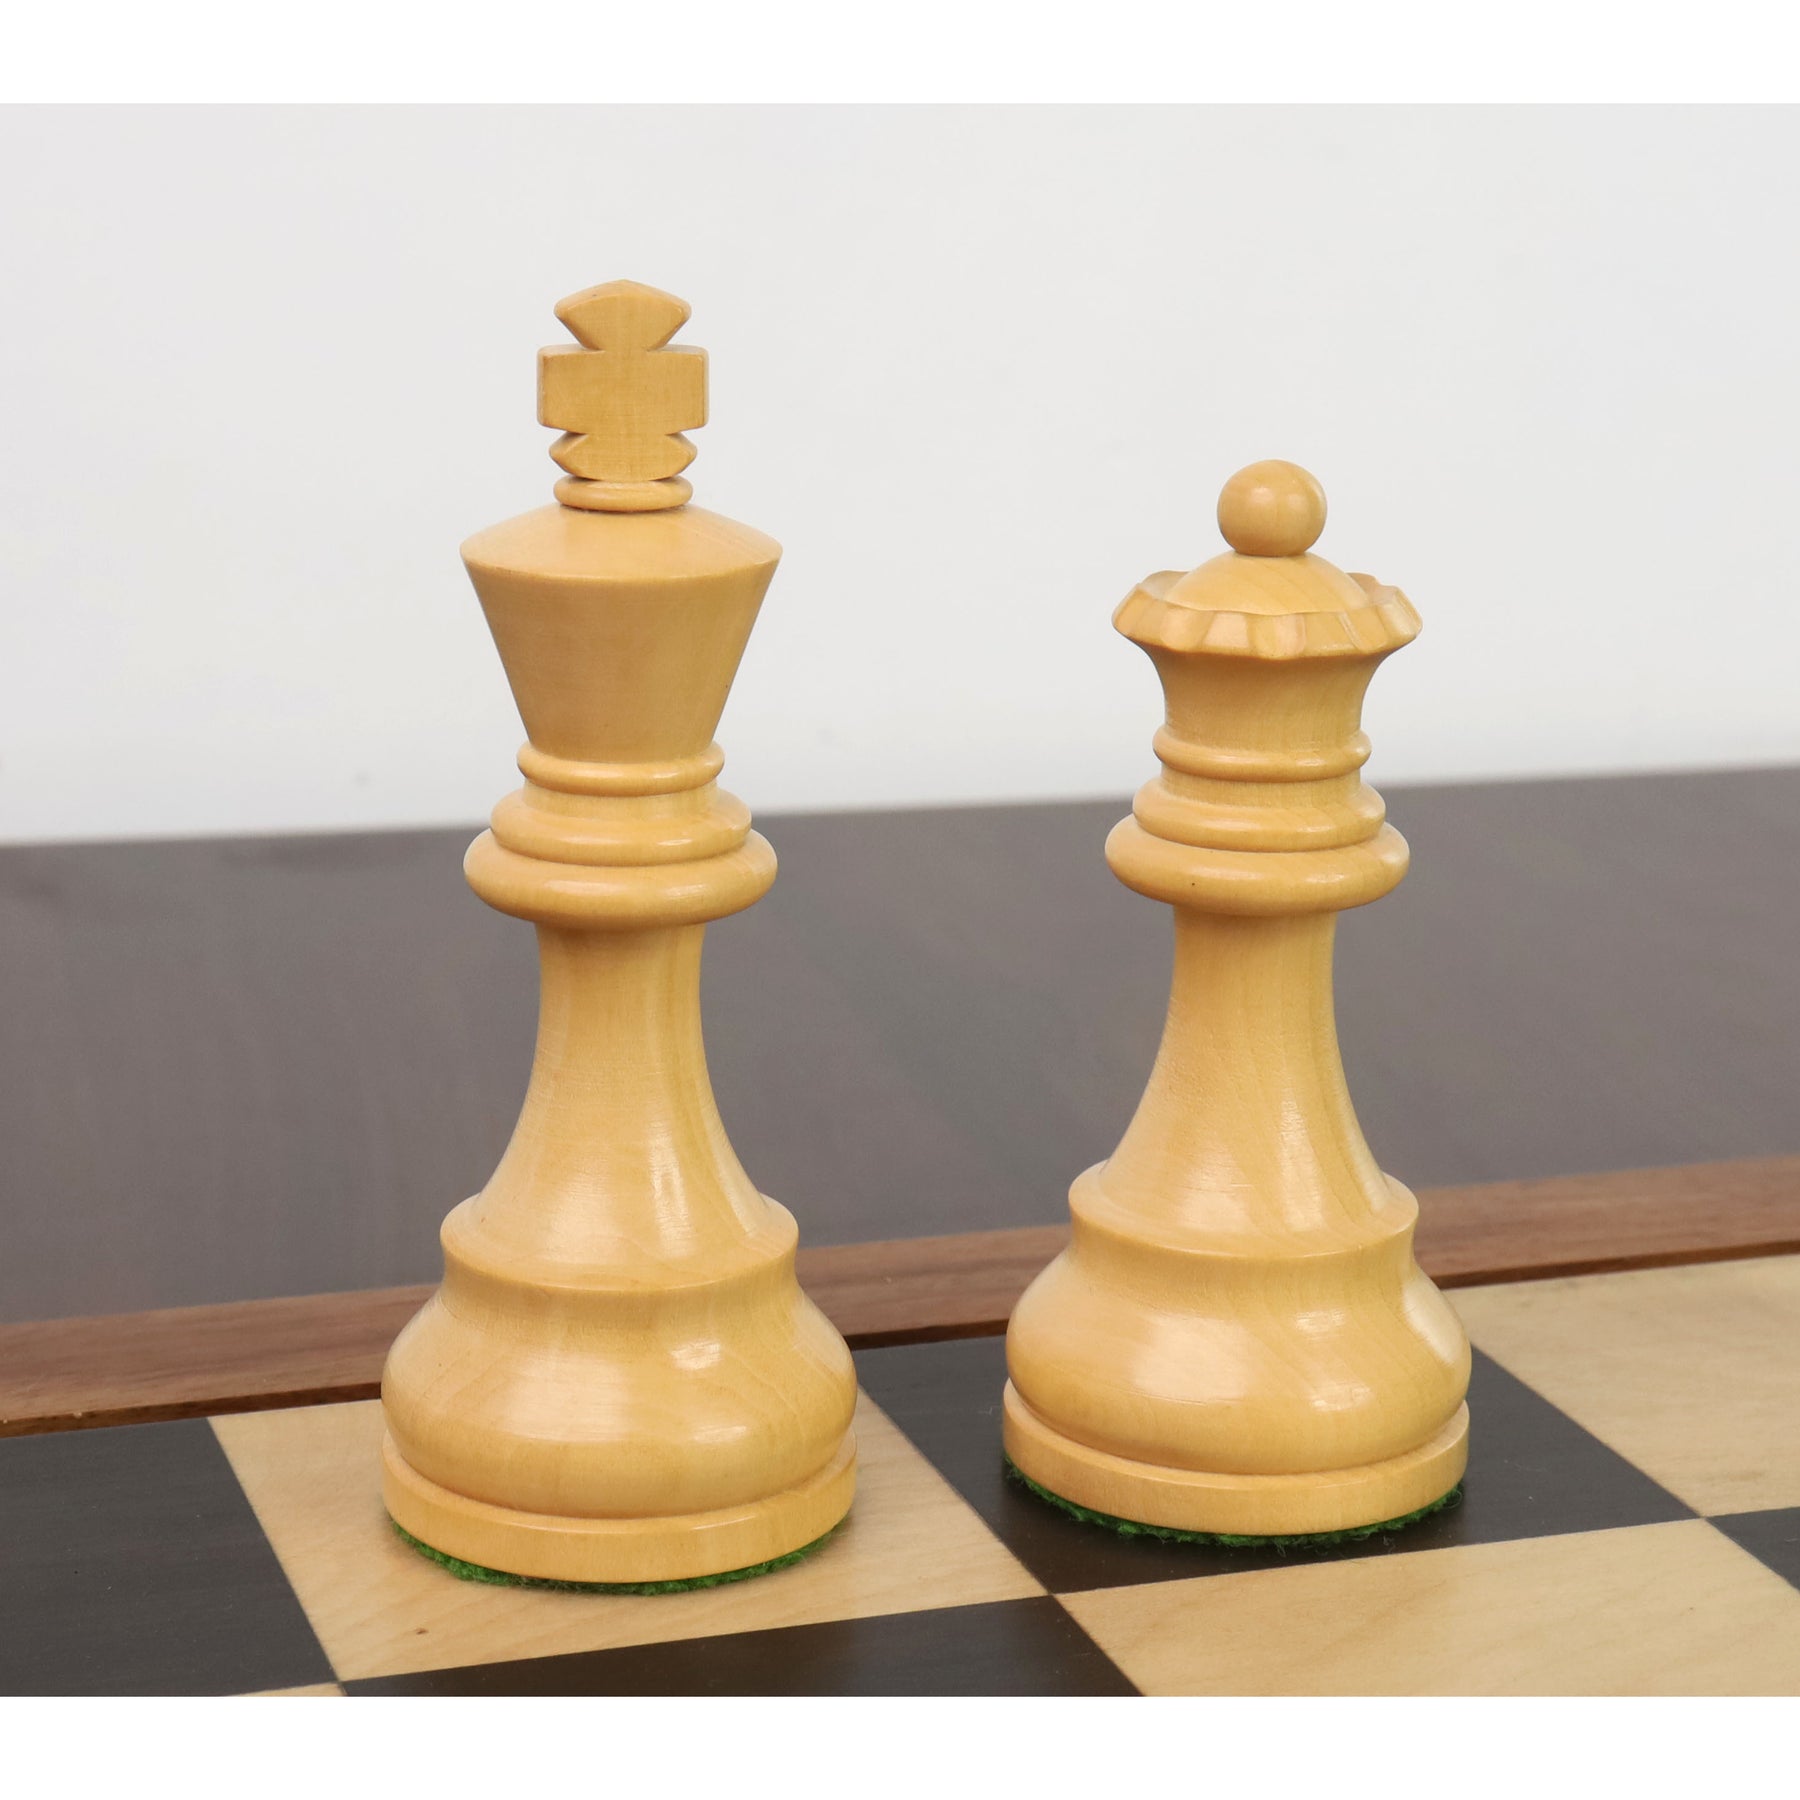 French Lardy Chess pieces - Chess Forums - Page 2 